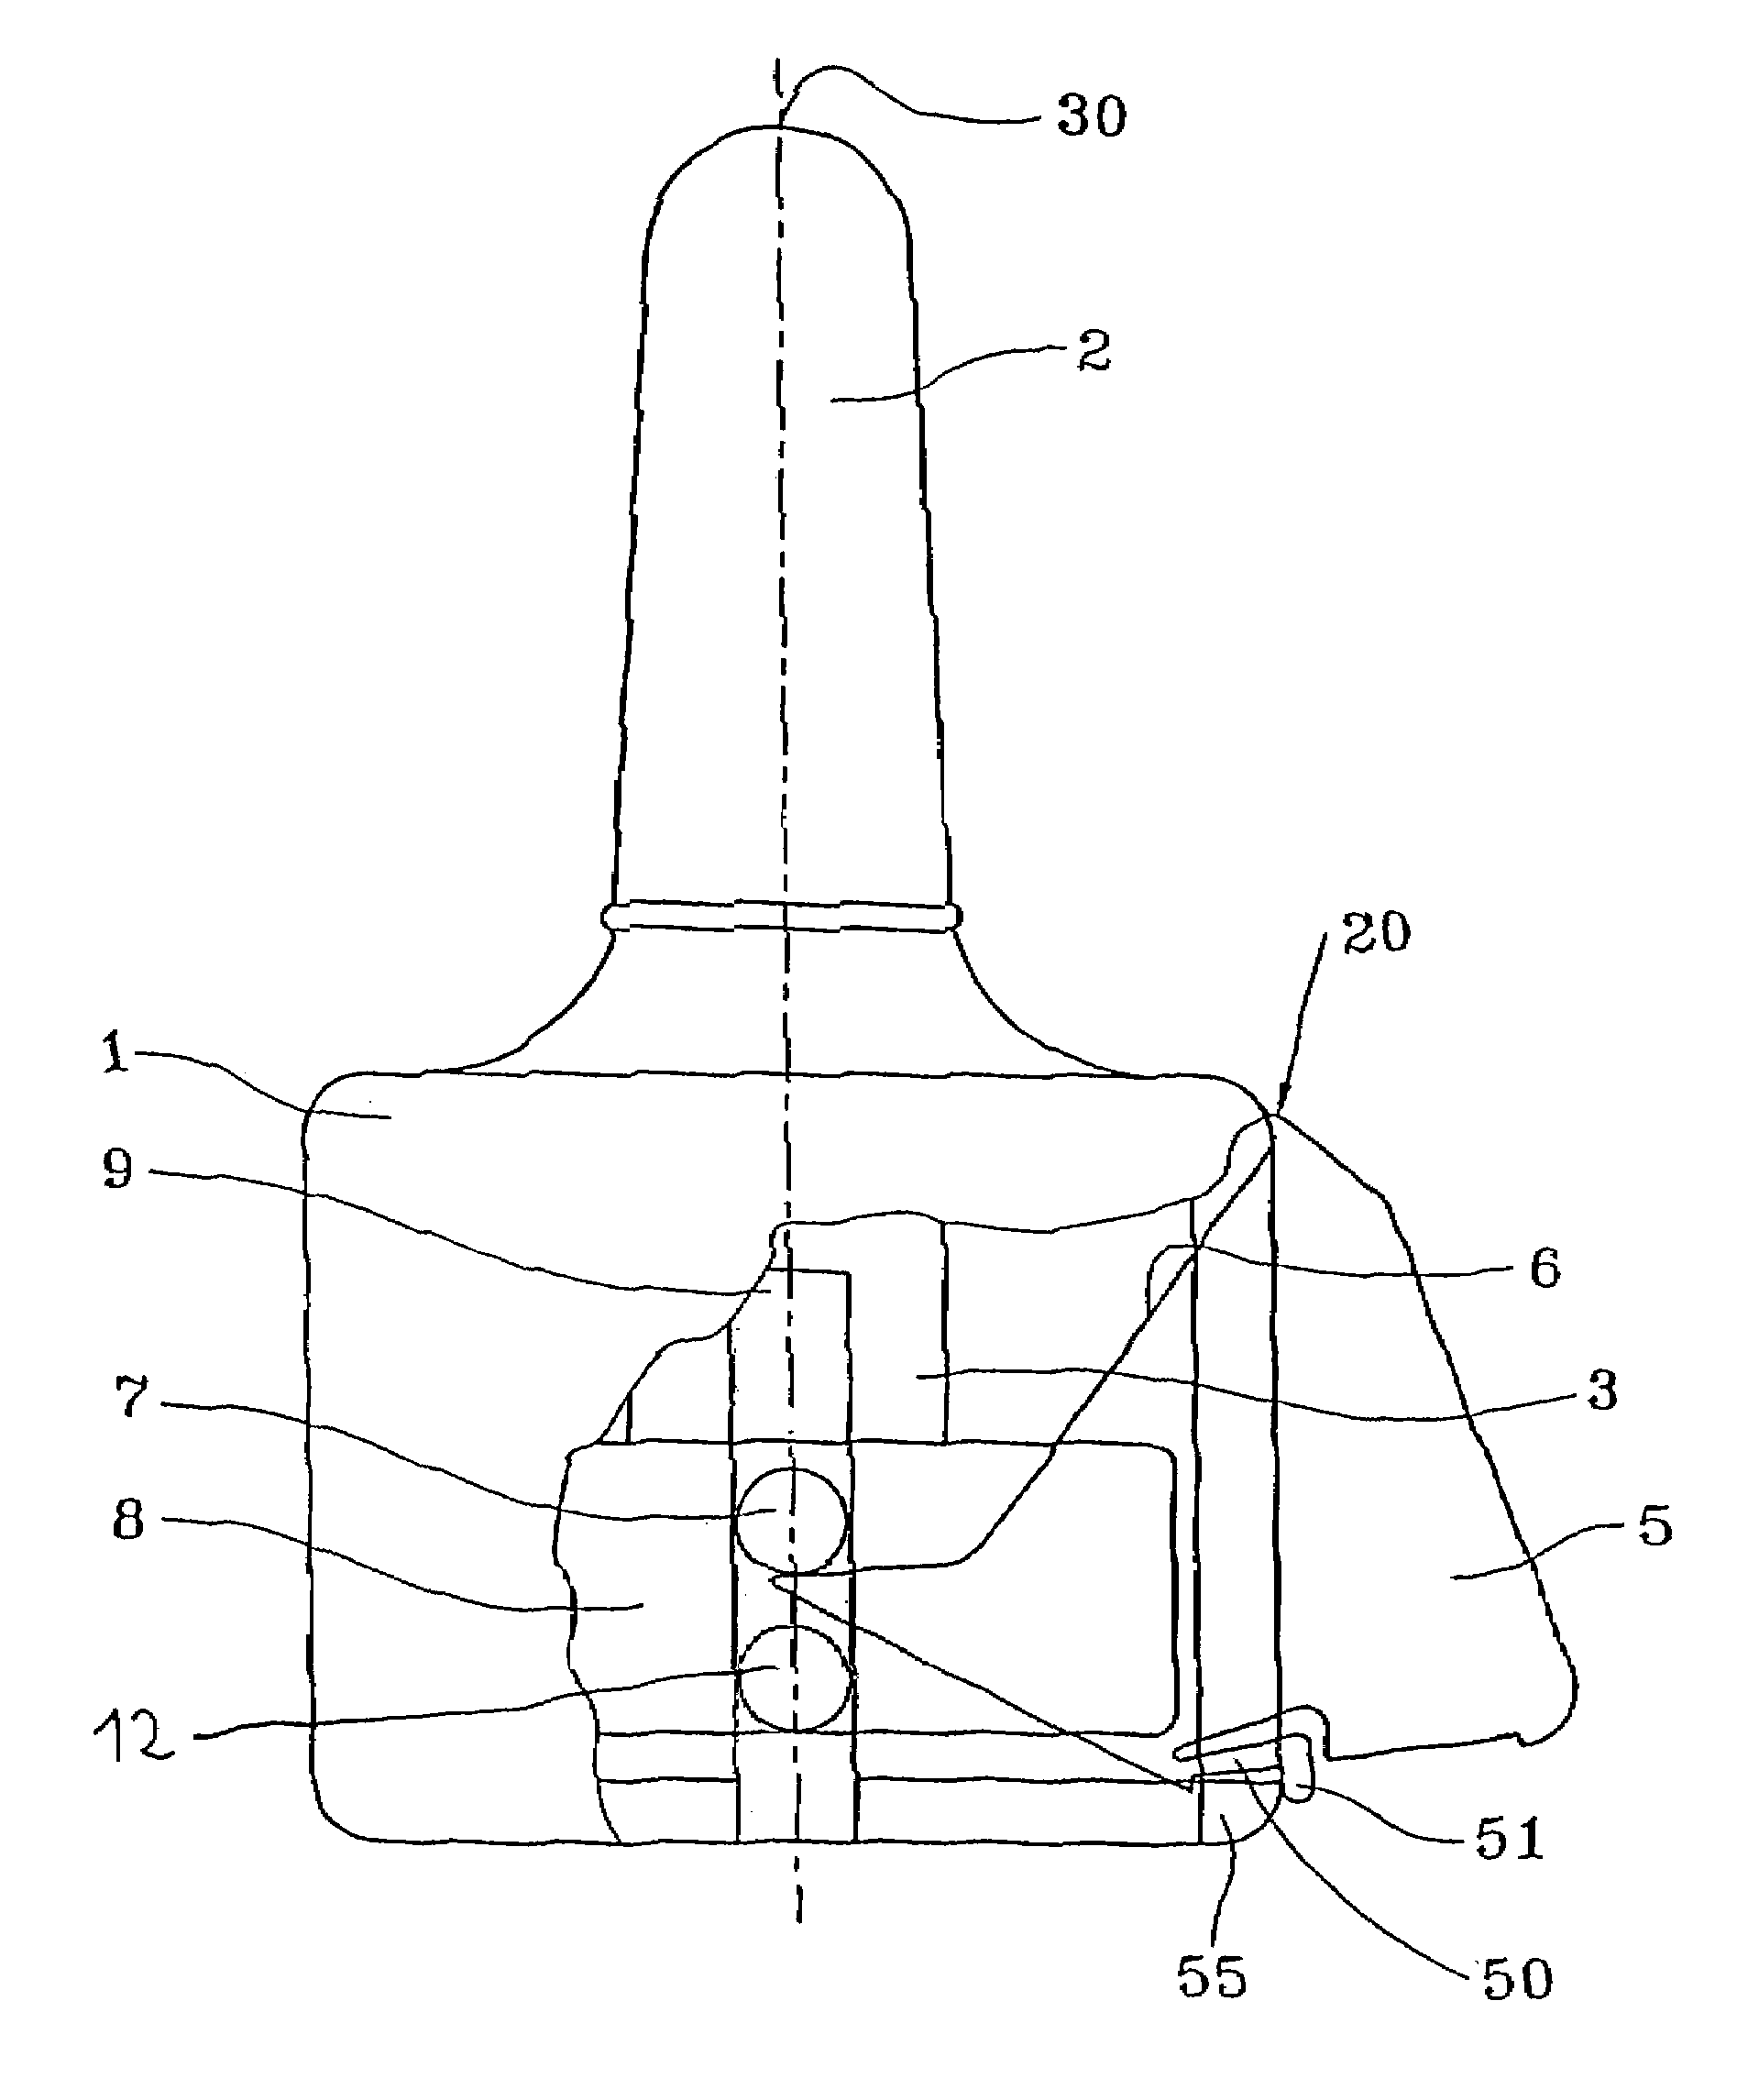 Fluid product dispensing device